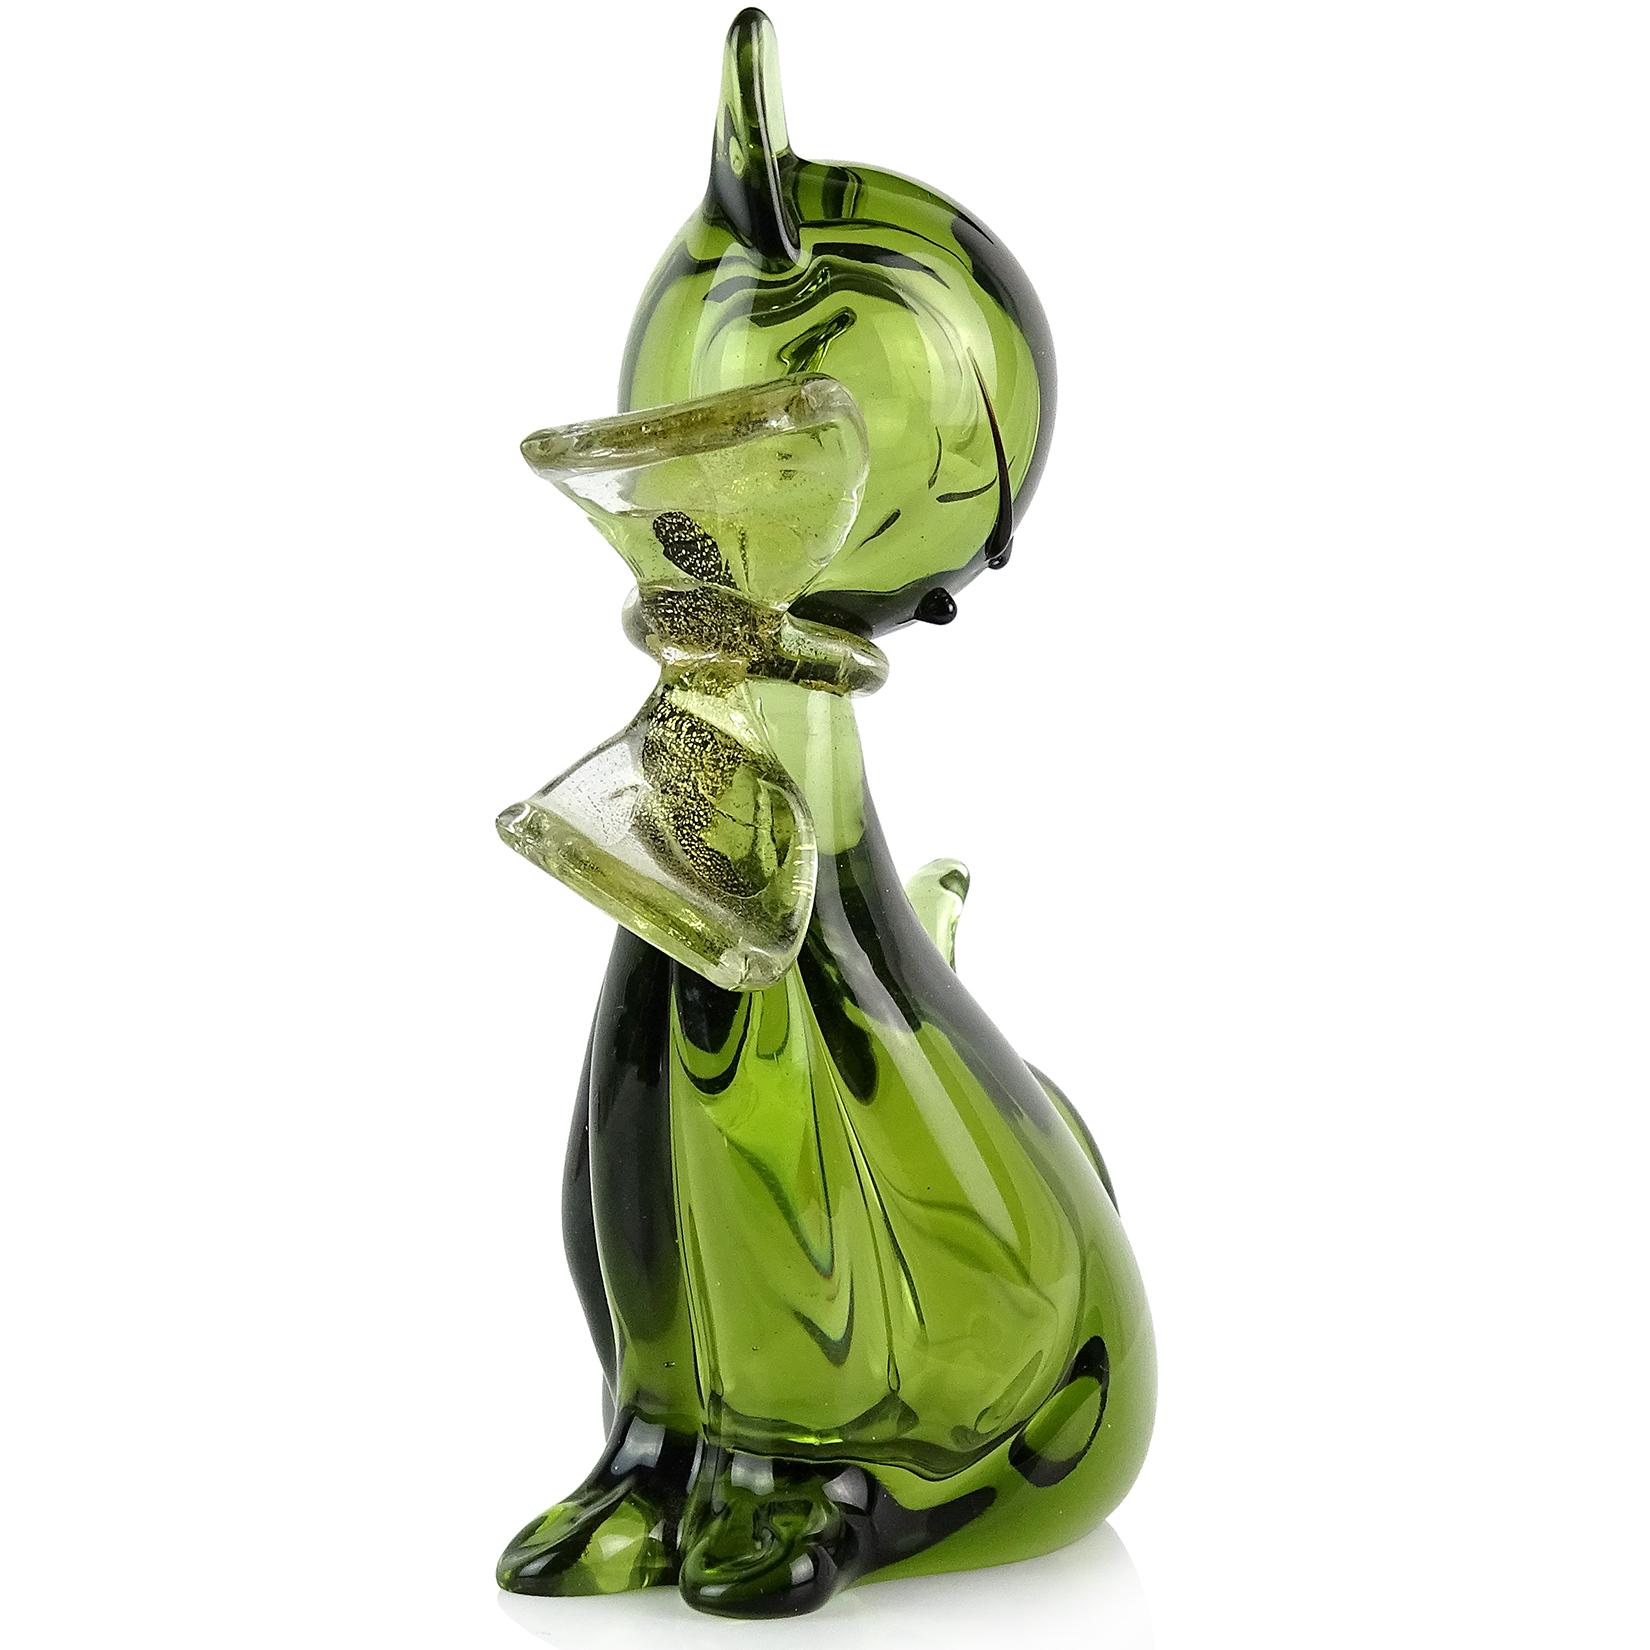 Beautiful vintage Murano hand blown Sommerso green and gold flecks Italian art glass kitty cat figurine. Documented to designer Alfredo Barbini. The kitten has a gold leaf bow around its neck. Very elegant shape, with cute face with black accents,